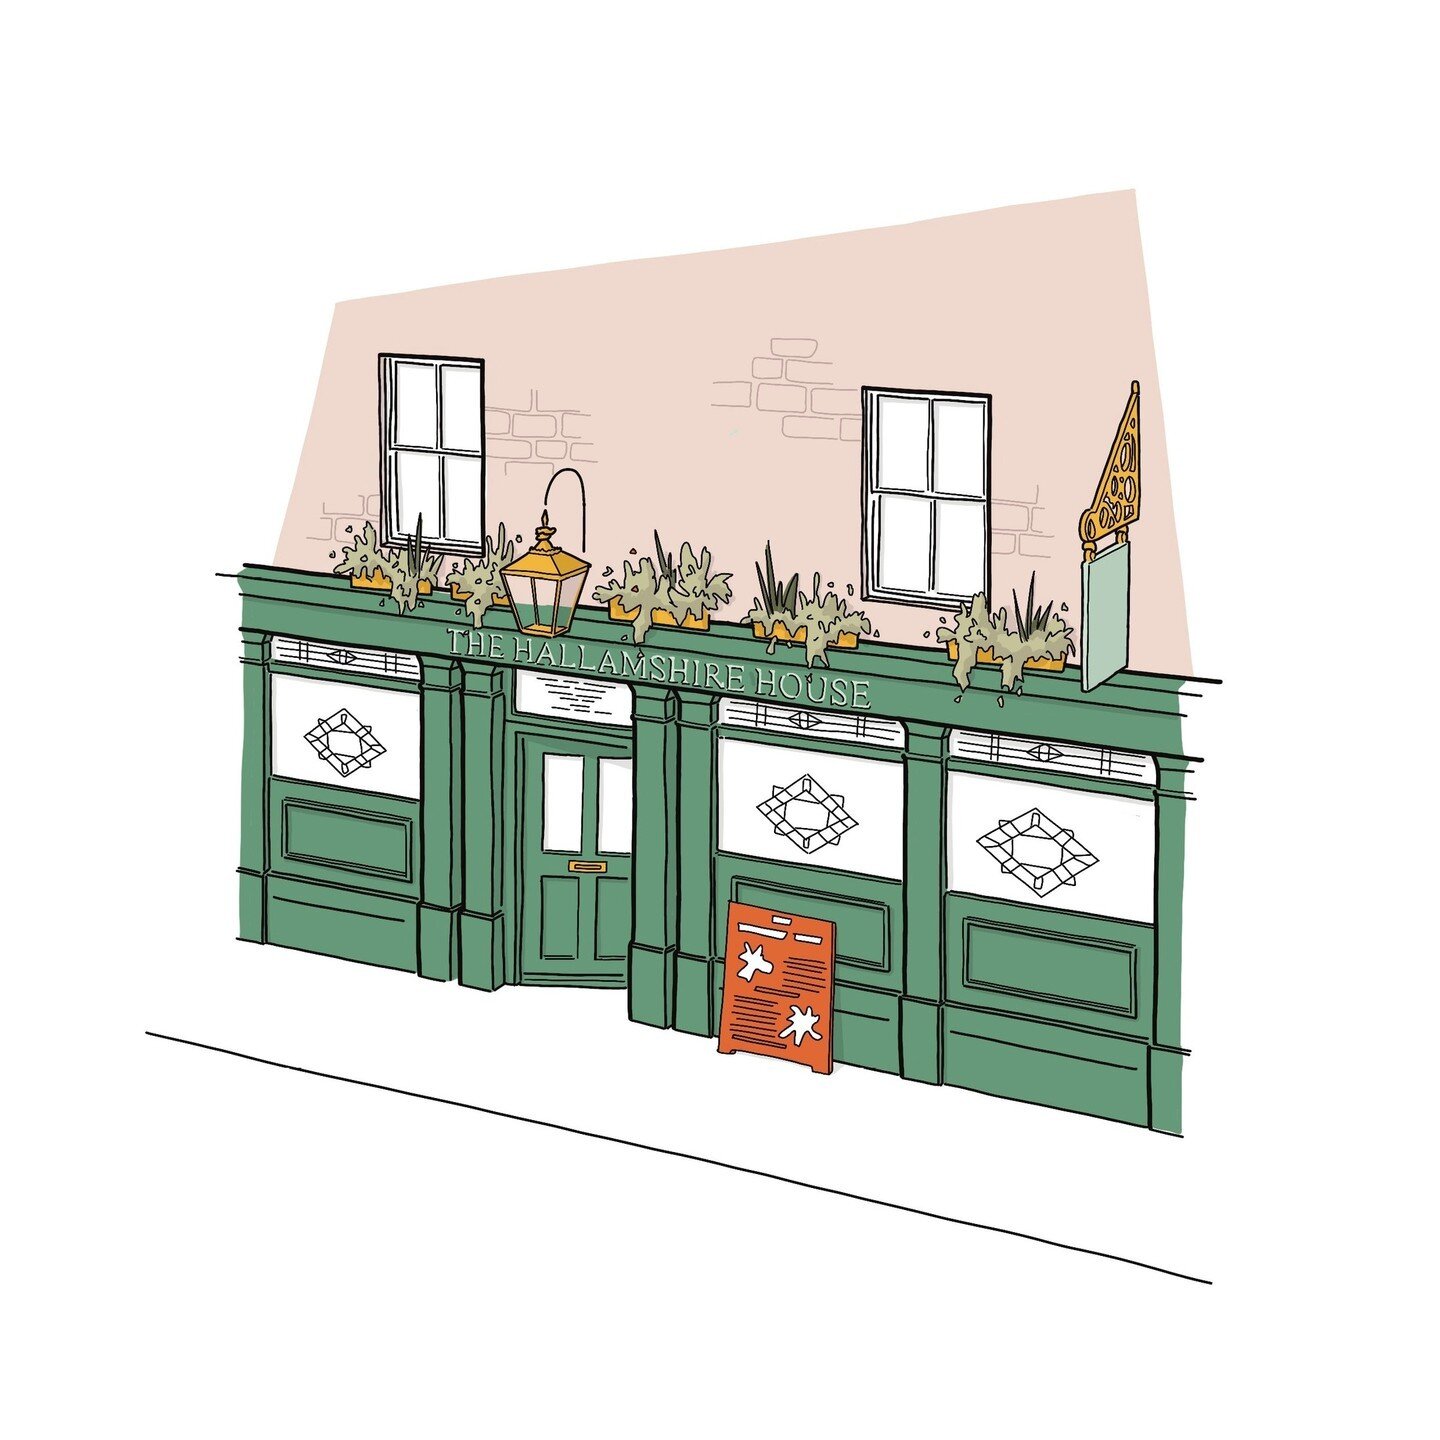 Quick lil sketch of a fab Sheffield pub - who knows it? 🍻⁠
.⁠
.⁠
.⁠
.⁠
.⁠
⁠
#katherinedaunceyillustration #architecturalillustration #architecturalsketch  #architecturesketch #procreate #illustrationartwork #architecture #illustrator #illustration #